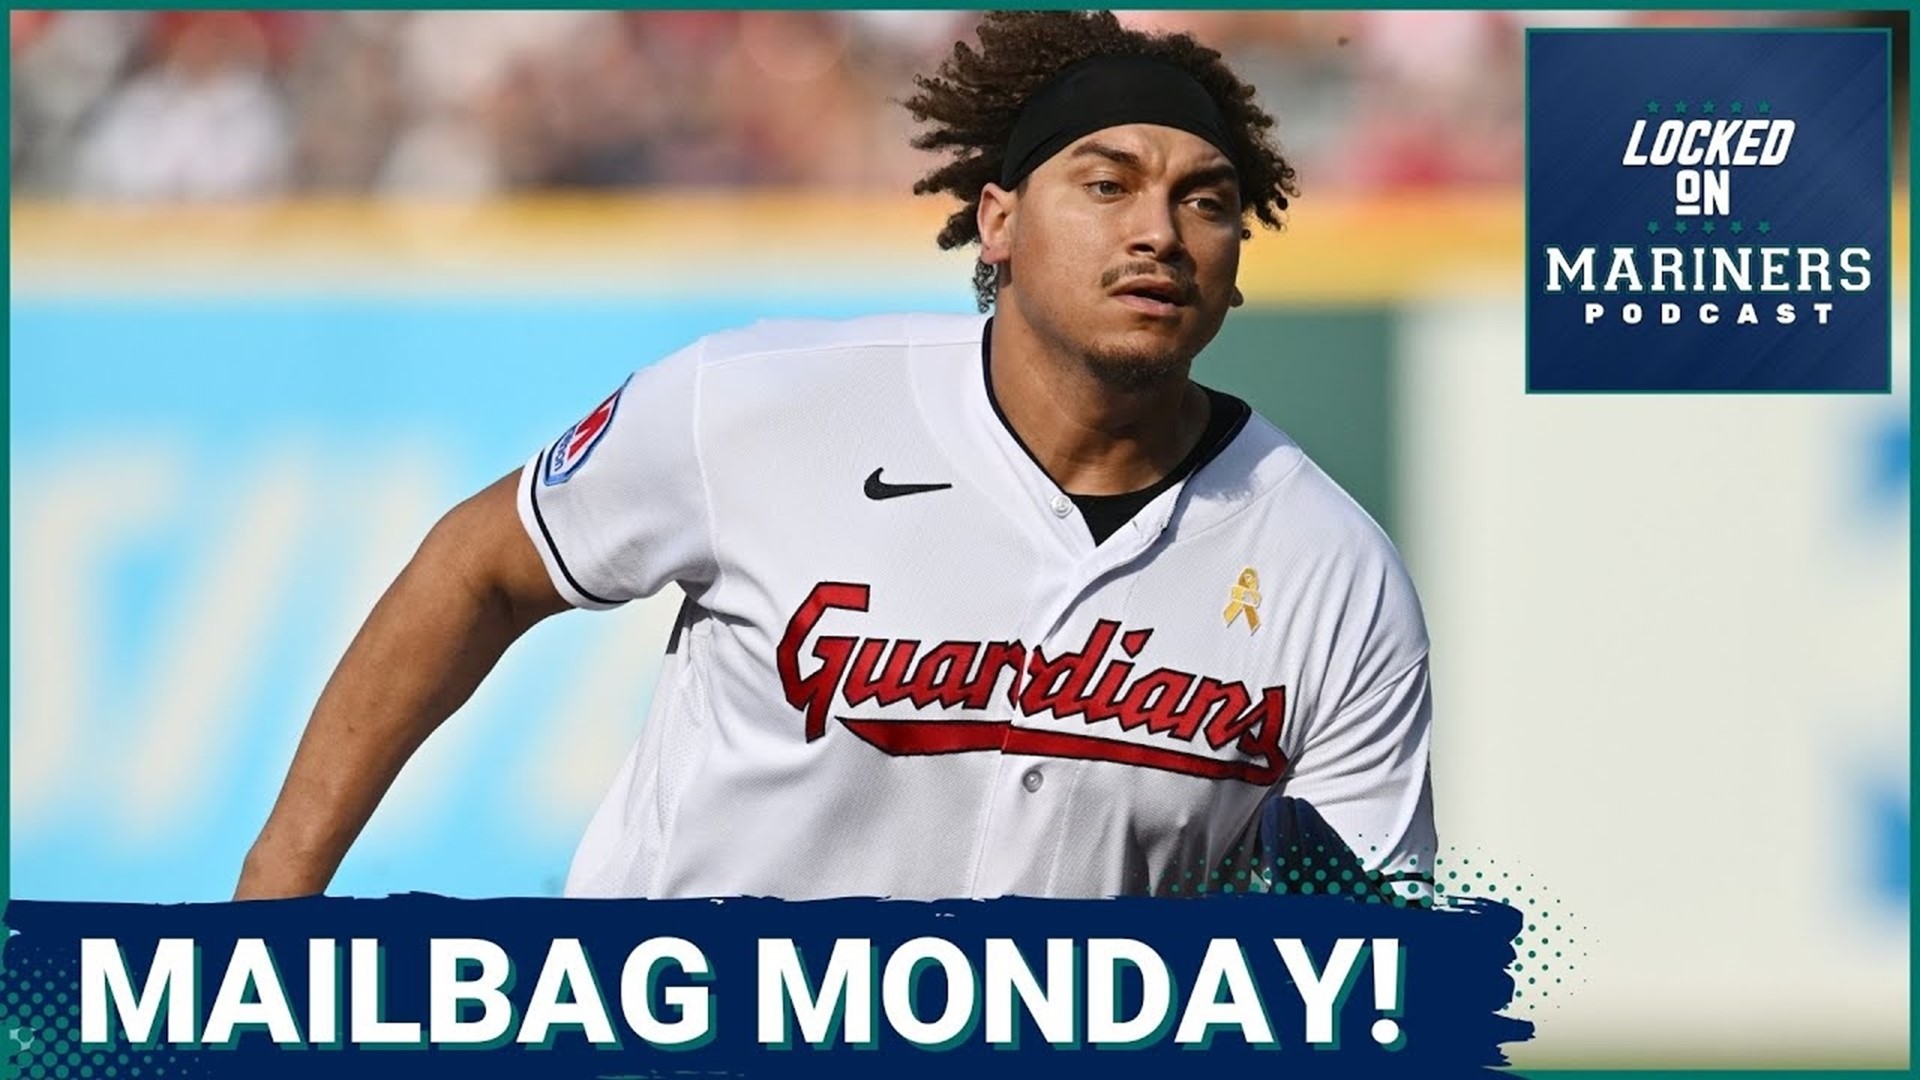 It's Mailbag Monday! Ty and Colby answer some of your Mariners questions.